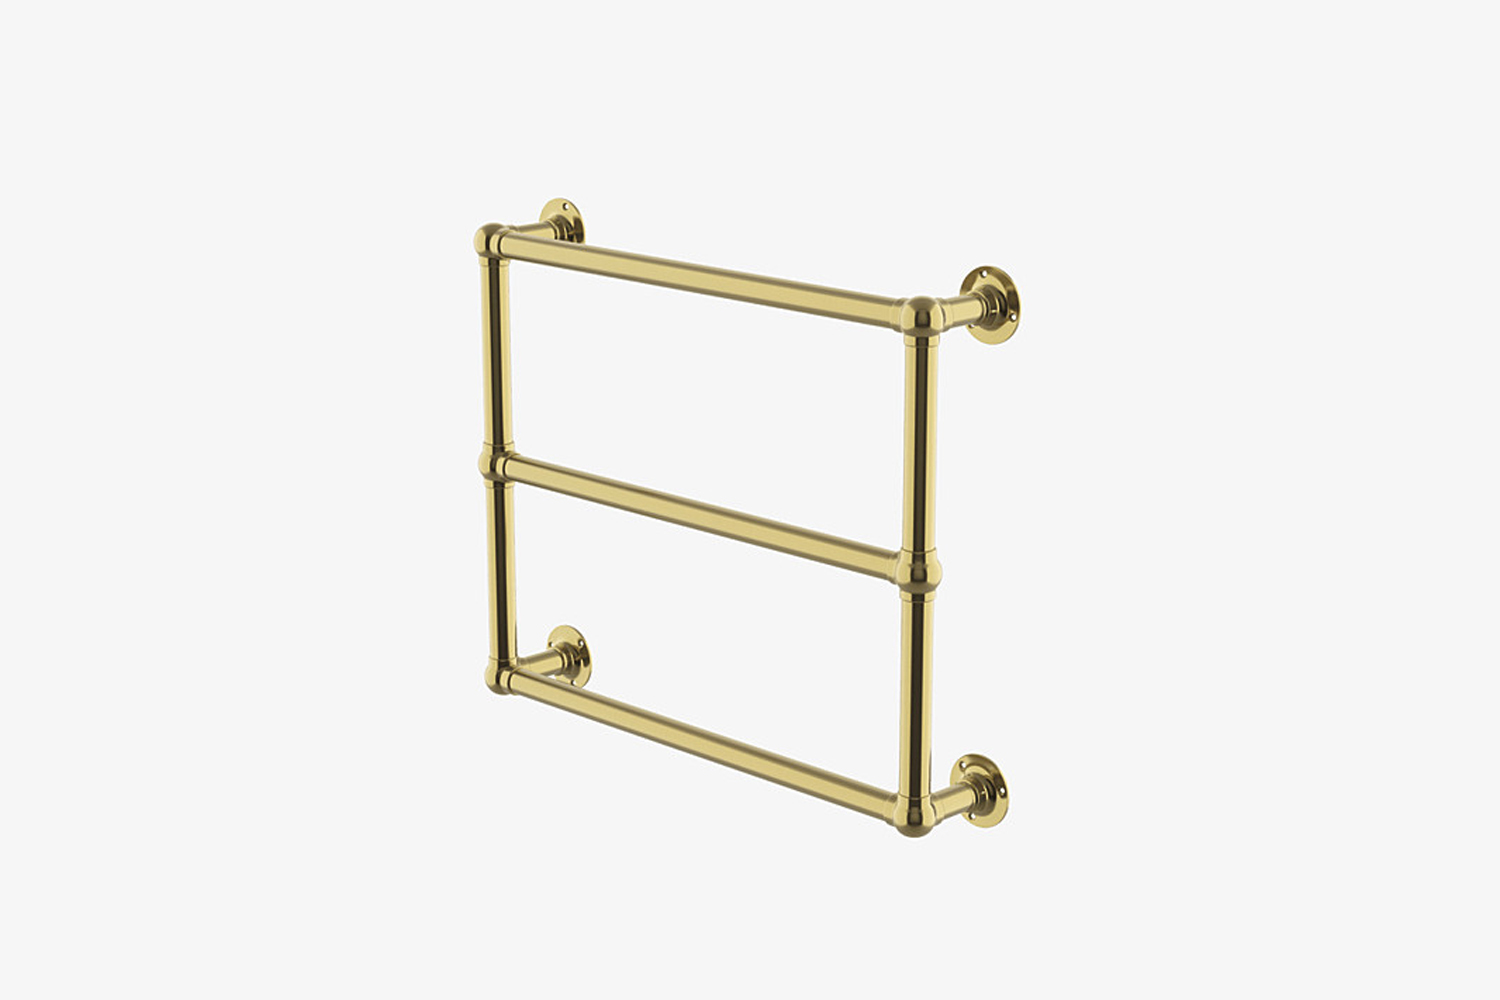 for something similar to the vintage brass towel warmer seen in the kitchen, th 17